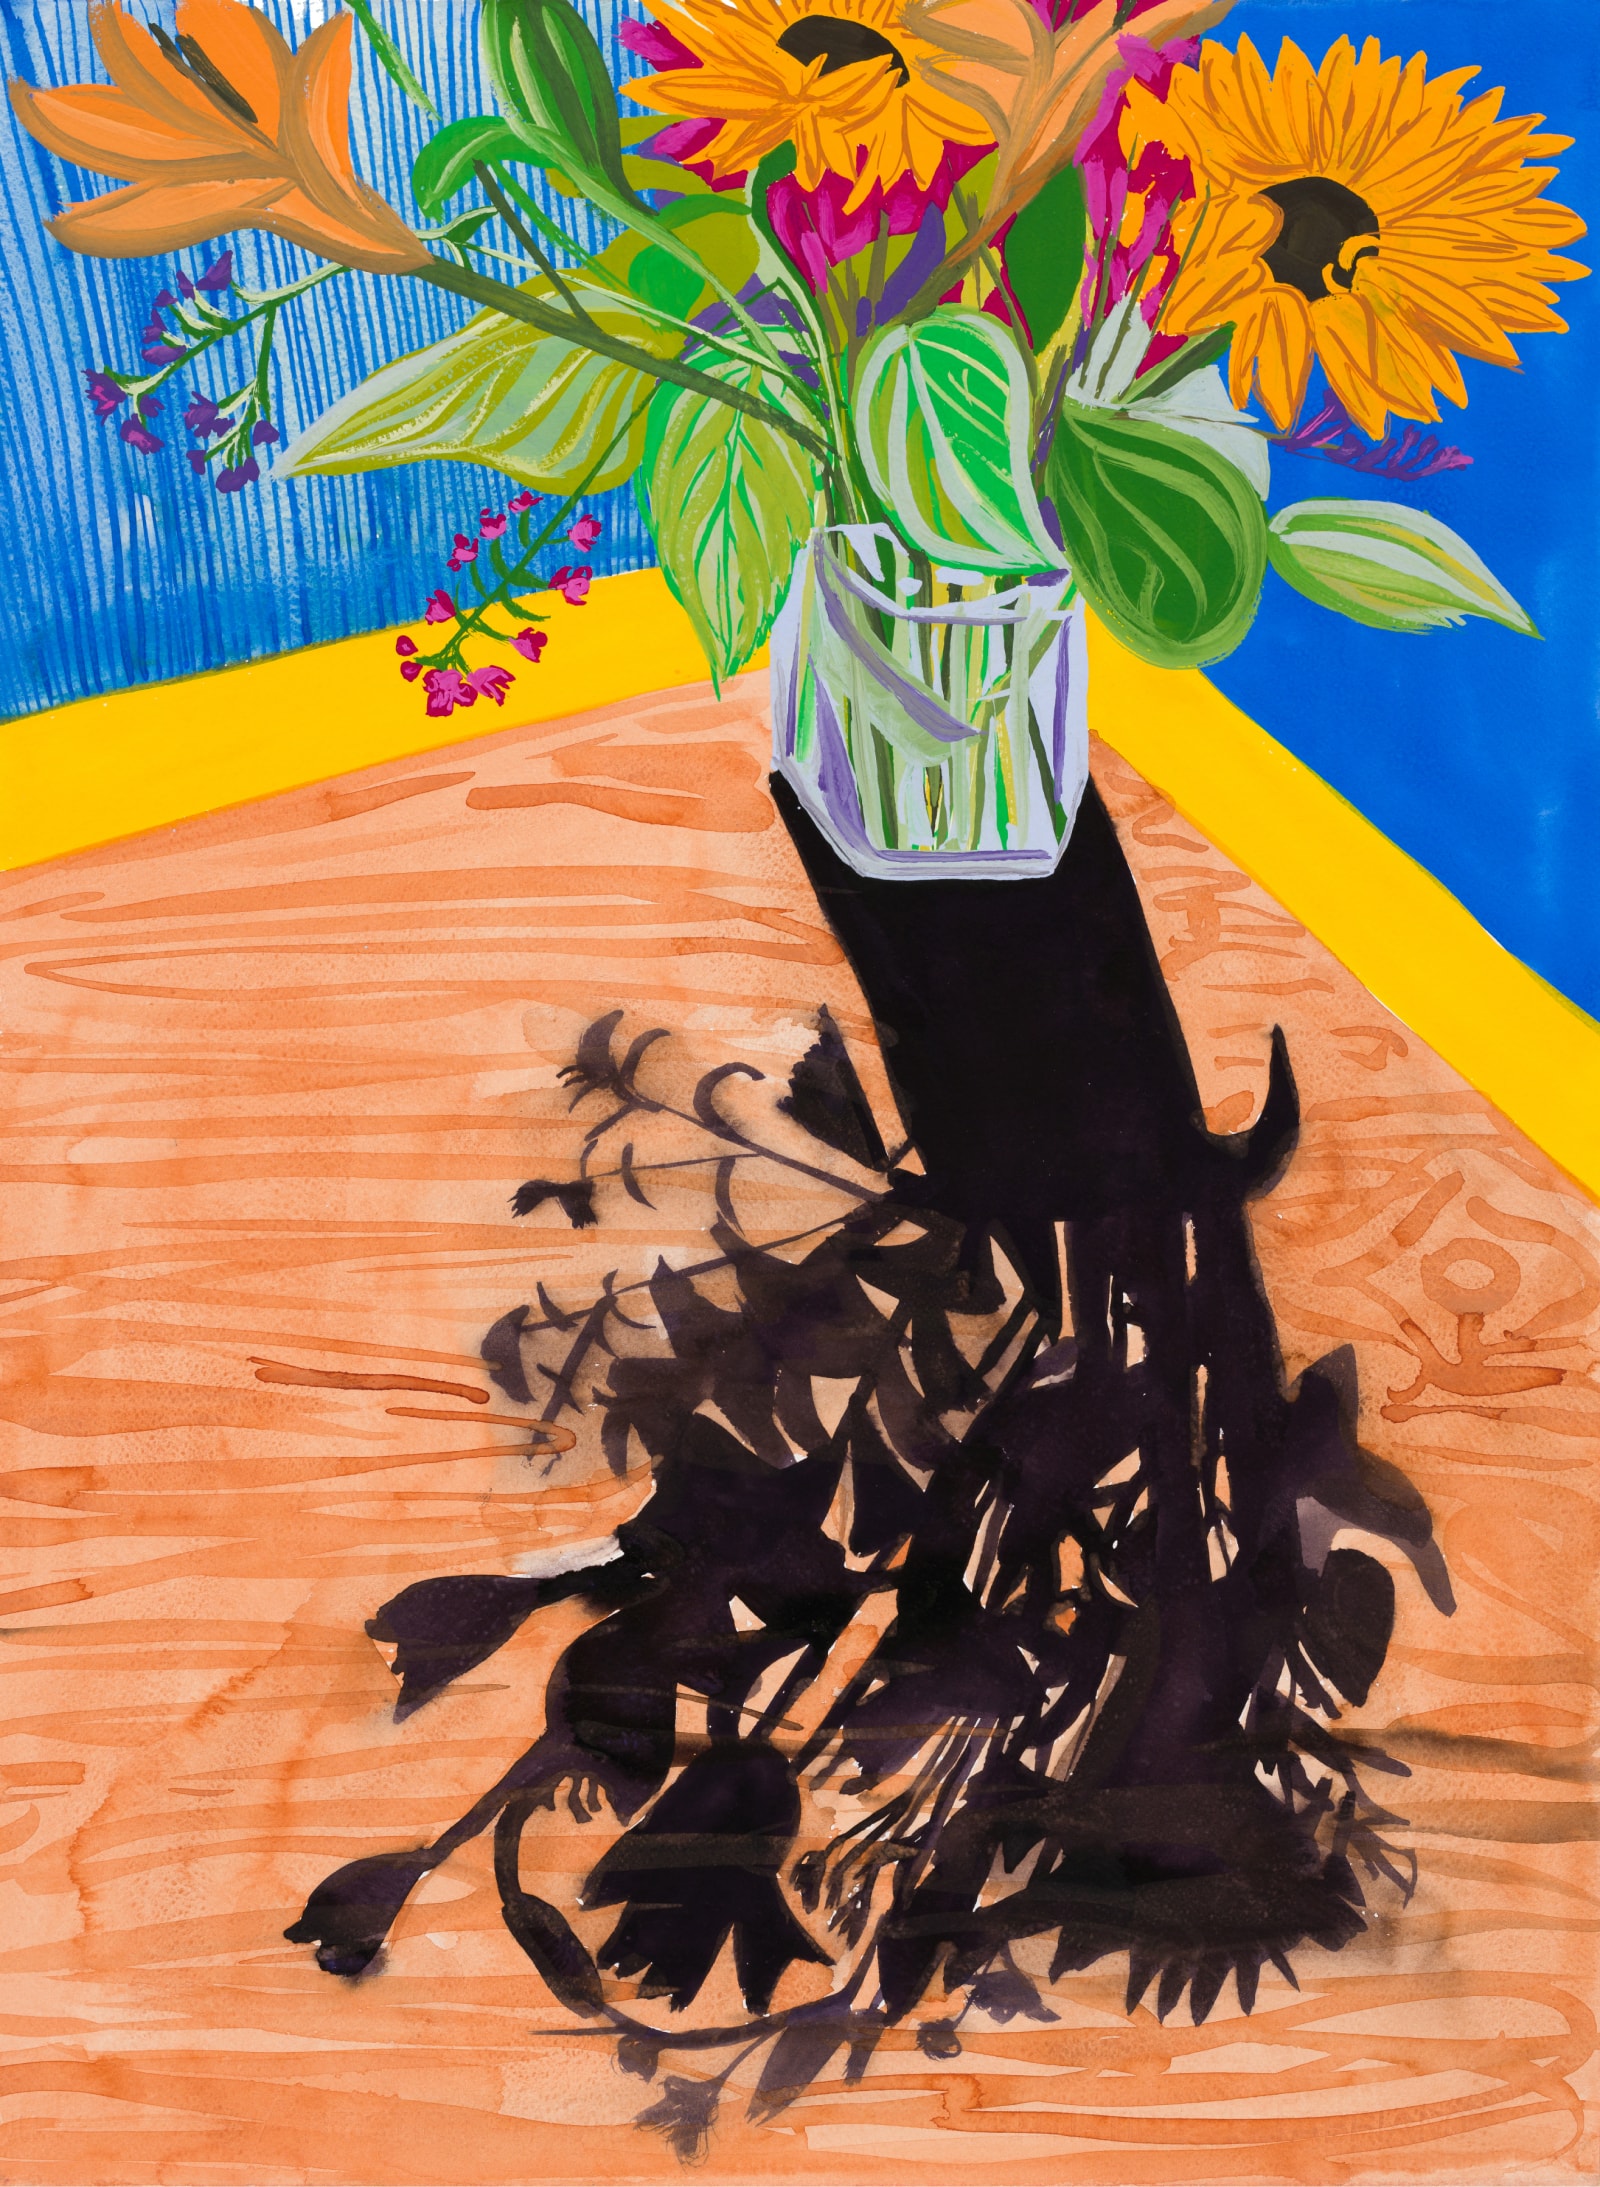 Nisenbaum’s “Sunflowers” featuring a glass vase of cut sunflowes with the arrangement’s black shadow in the foreground